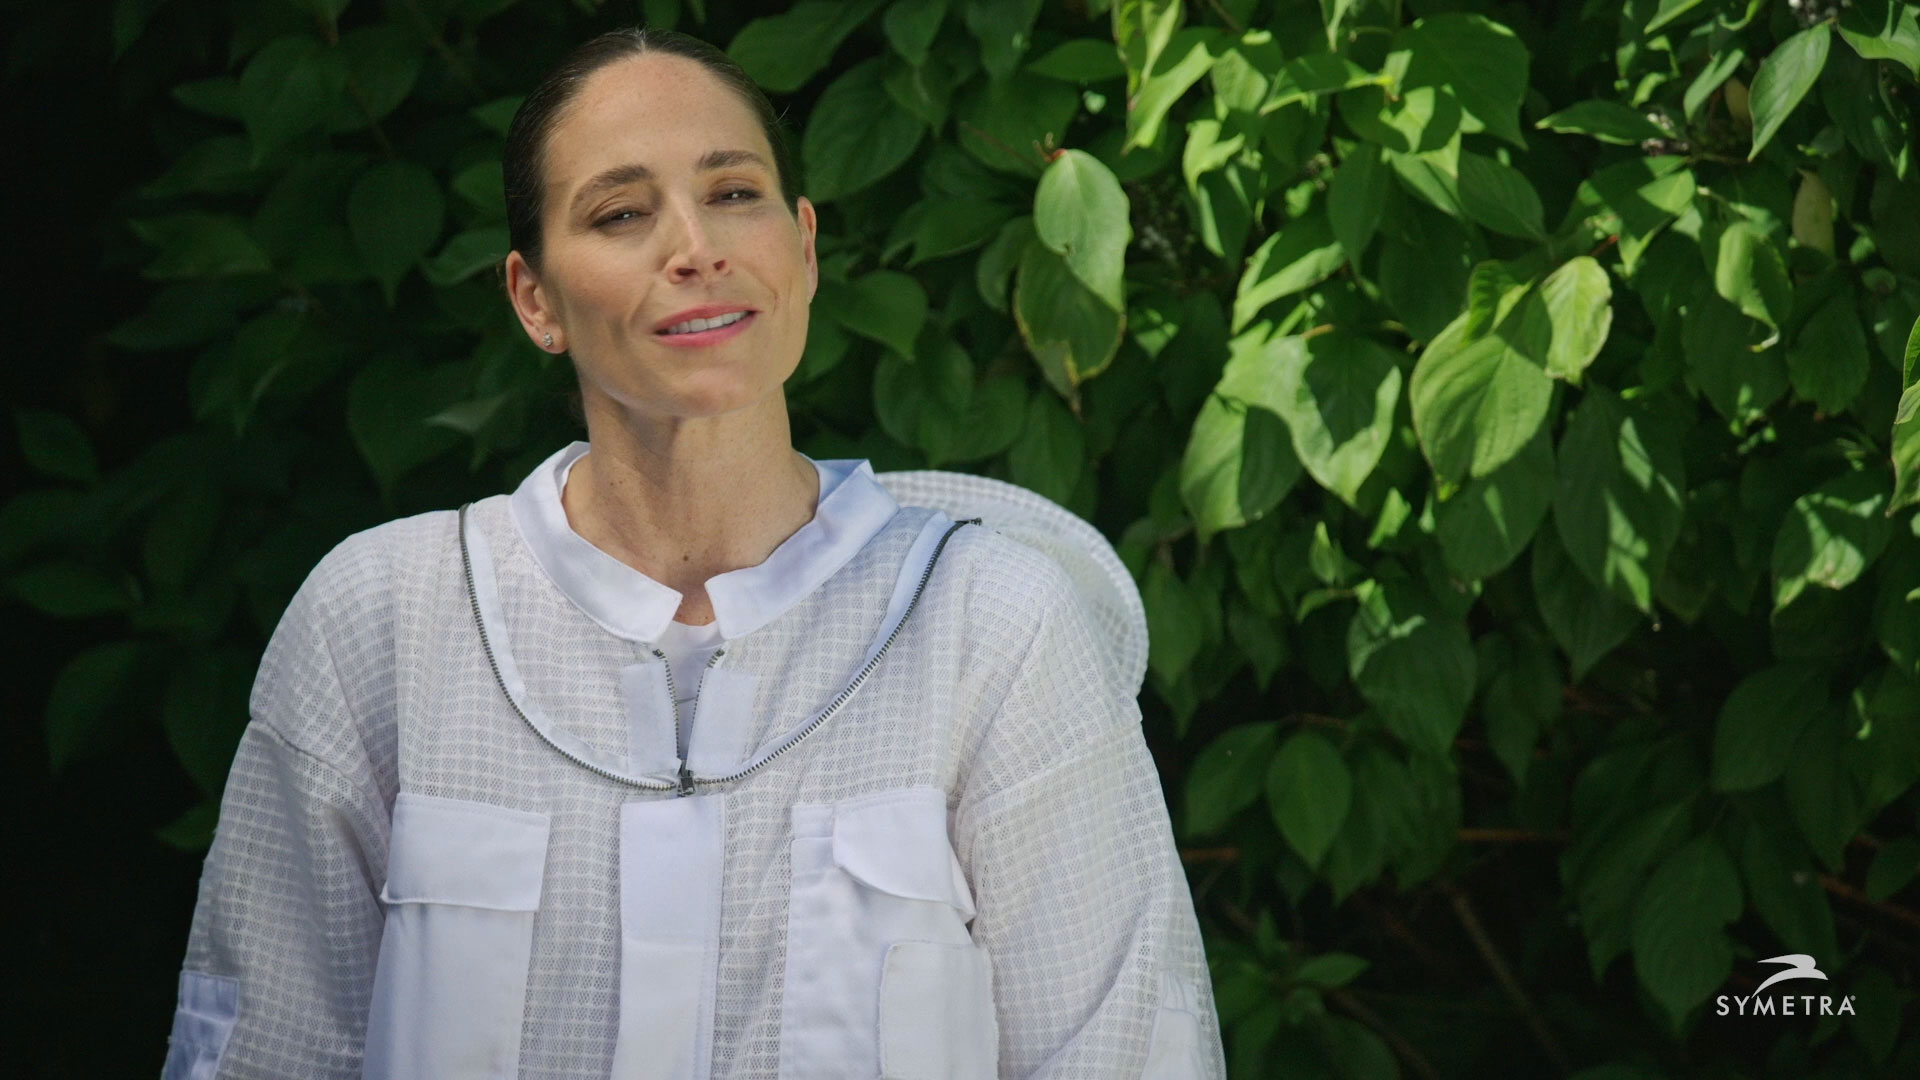 Symetra helps basketball legend Sue Bird spread her wings in retirement with tap dance, beekeeping and cake decorating in “Plan Well, Play Well,” its first-ever content series and social-first campaign.